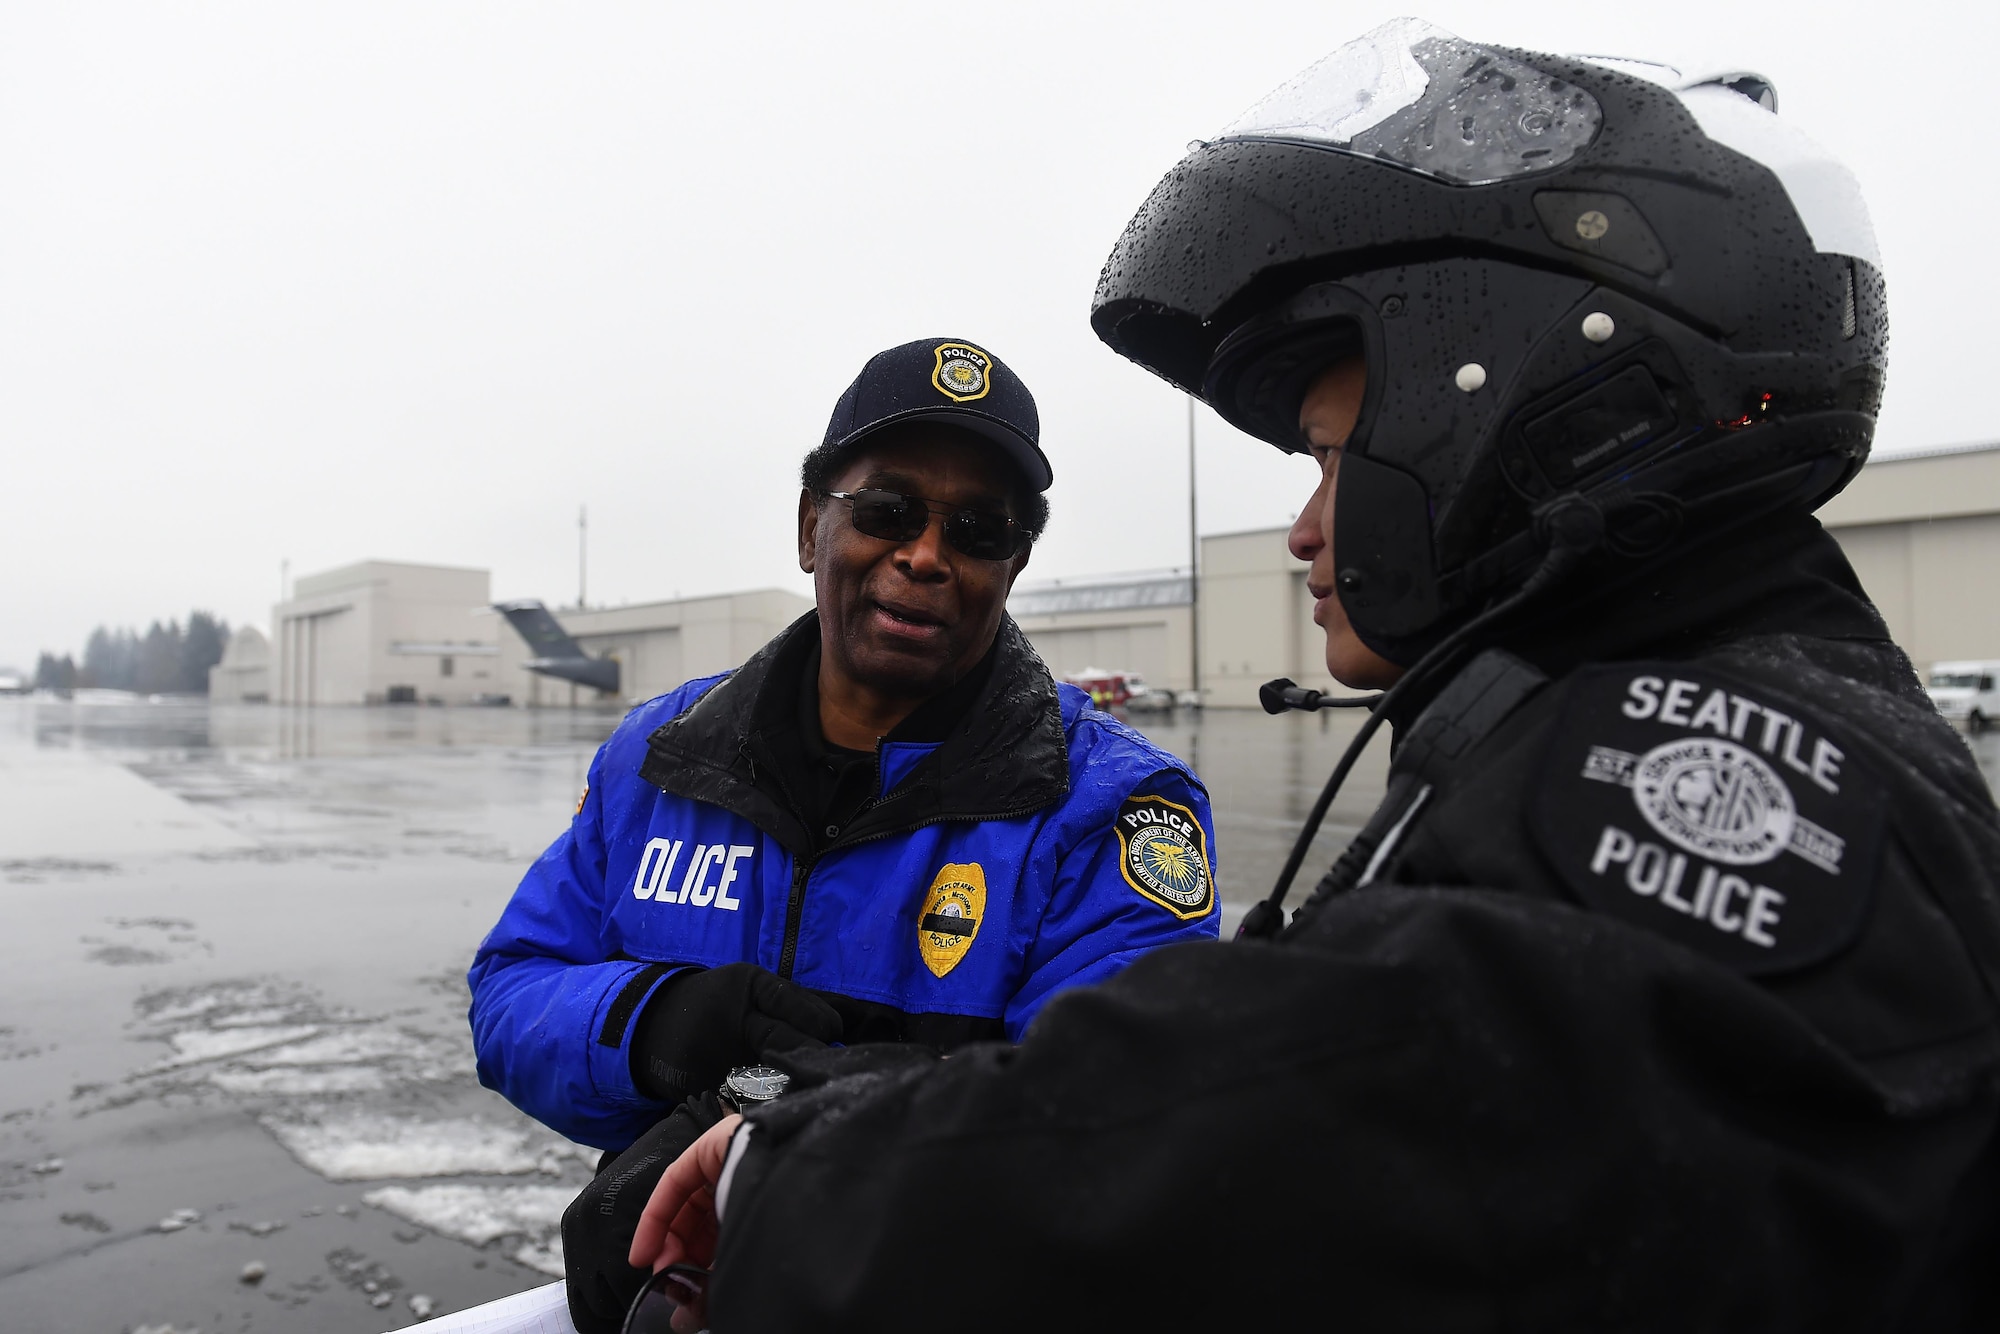 Charles Thornton, Joint Base Lewis-McChord Directorate of Emergency Services joint operations officer for McChord Filed, coordinates with a Seattle Police Officer Dec. 9, 2016, on McChord Field, Wash. Thornton was the lead coordinator and point of contact for the more than 450 vehicles and 1,250 people who staged at JBLM for the funeral of Tacoma Police Officer Reginald “Jake” Gutierrez.  (U.S. Air Force photo/Tech. Sgt. Tim Chacon)

